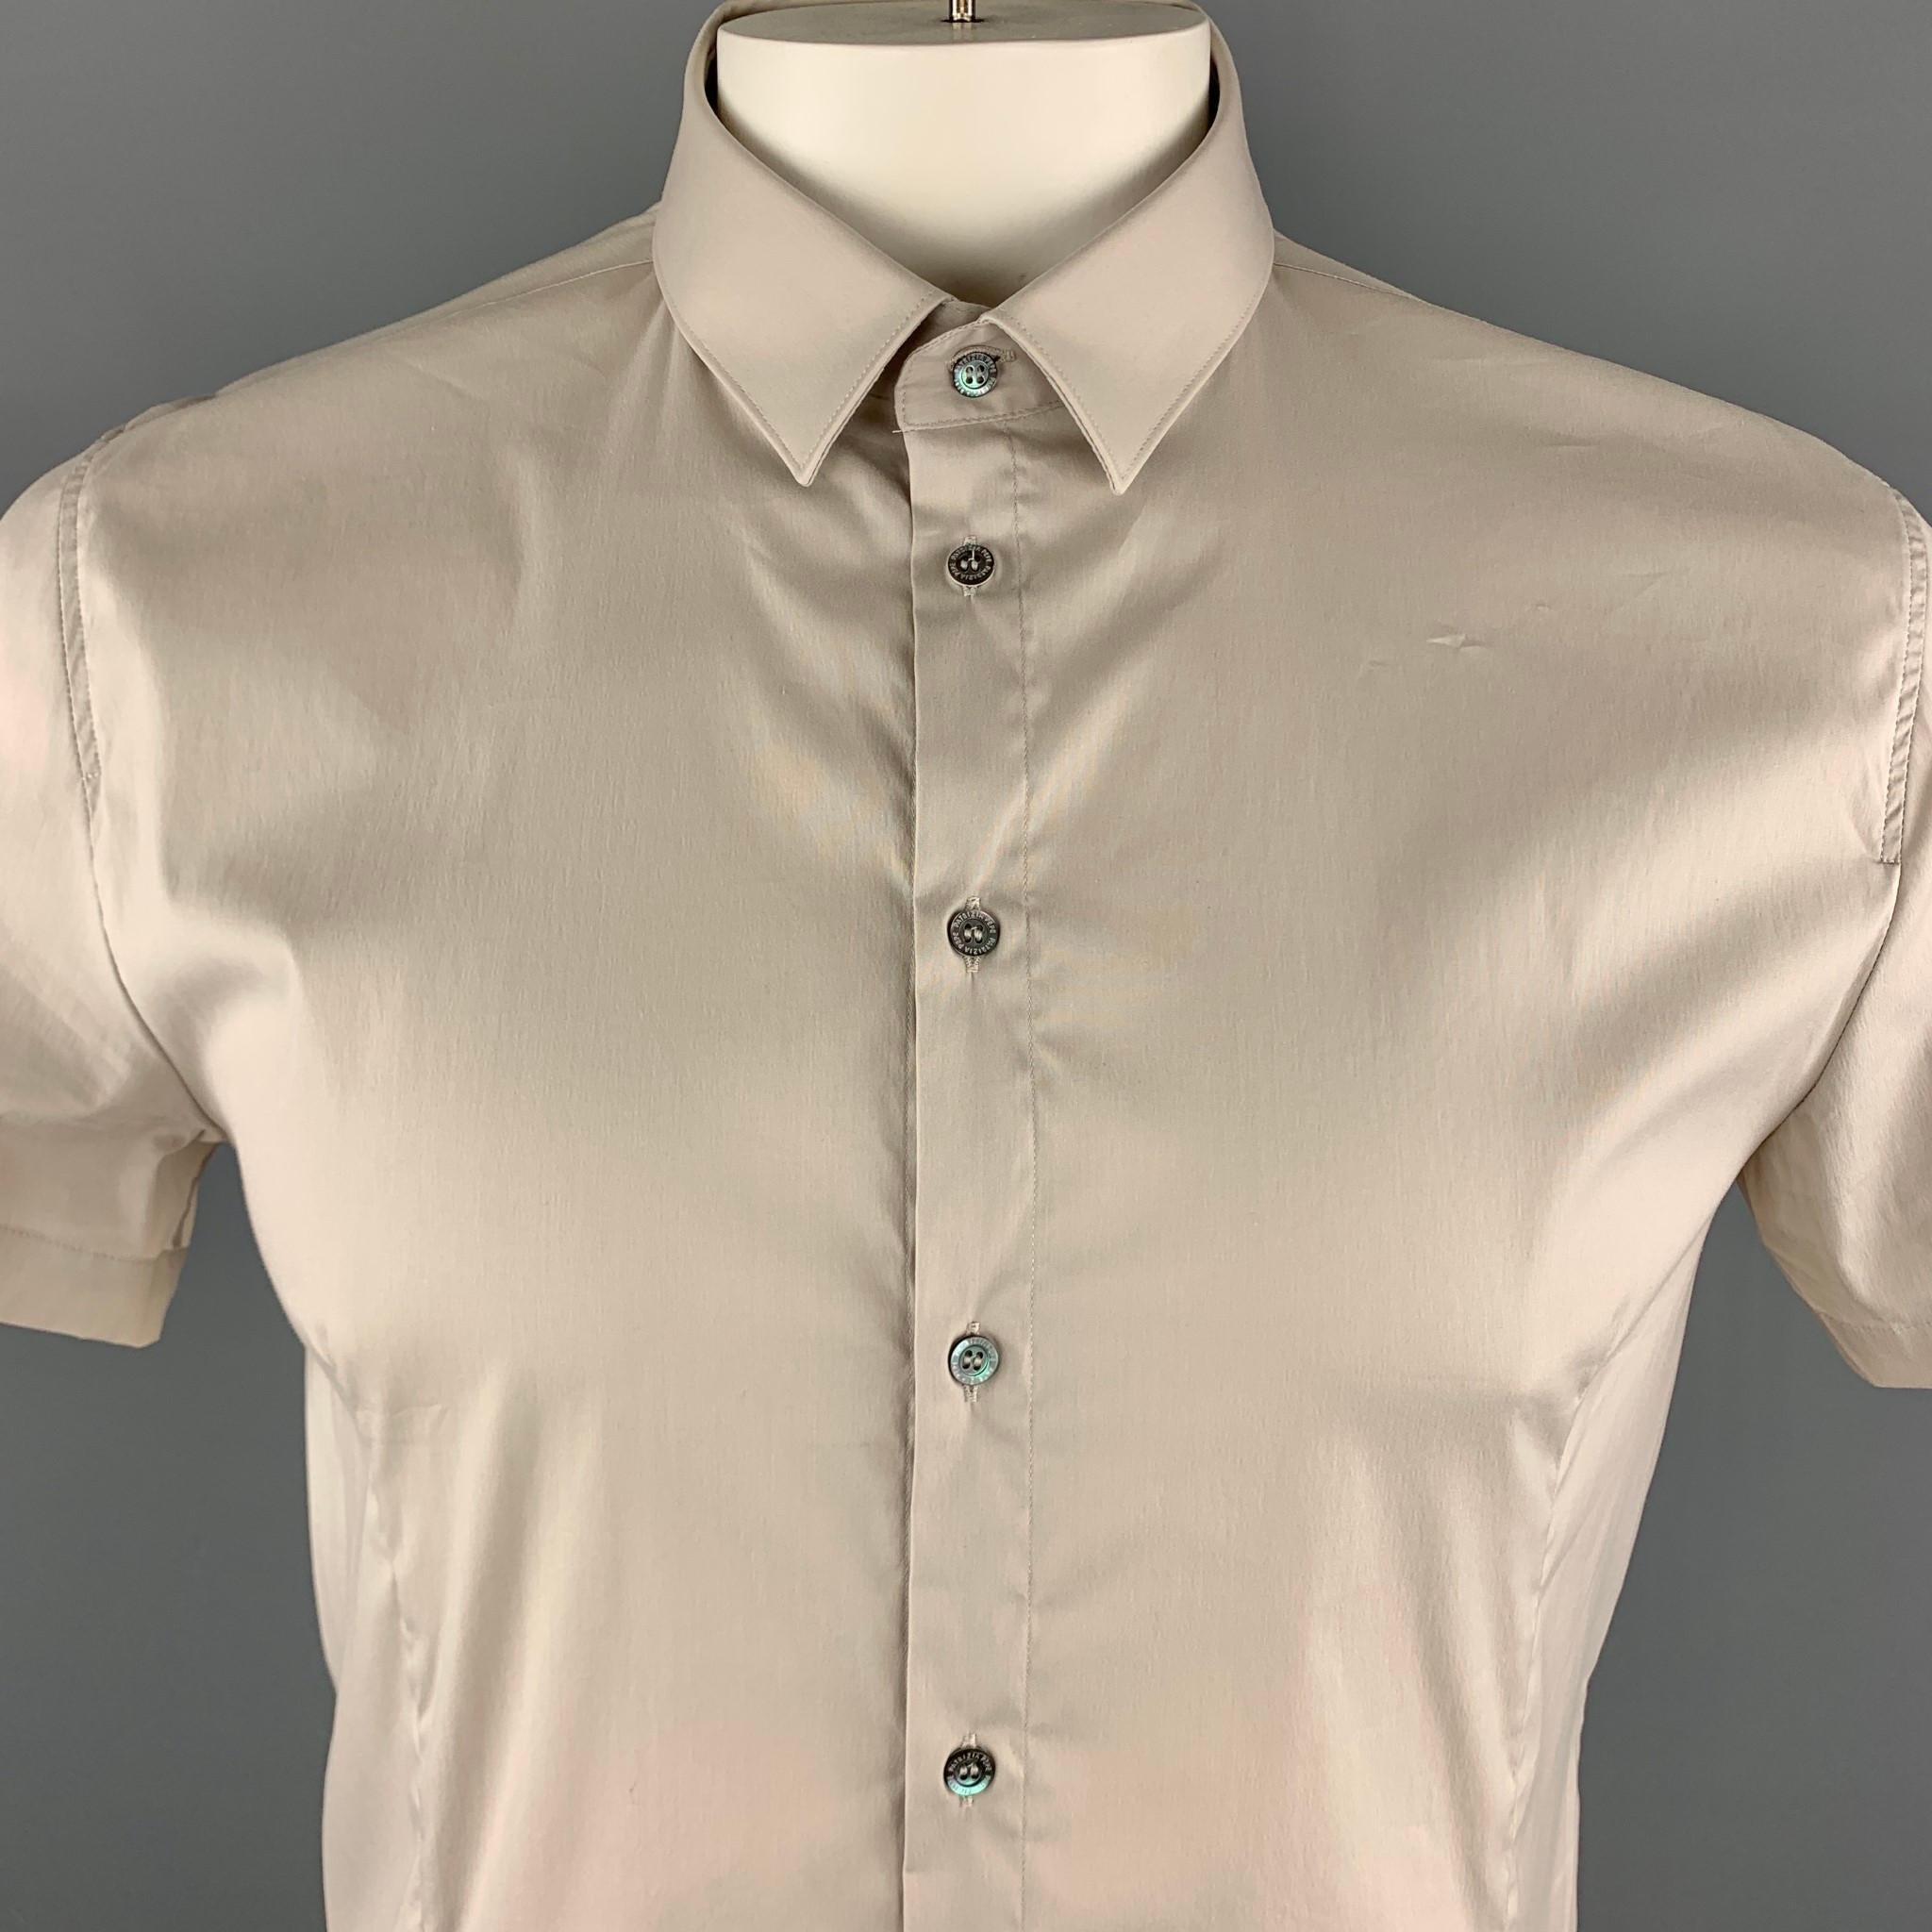 PATRIZIA PEPE Short Sleeve Shirt comes in a solid ivory cotton blend material, with a classic collar, darts at front and a pleat at back, in a slim fit. Altered. Made in Romania.

Excellent Pre-Owned Condition.
Marked: IT